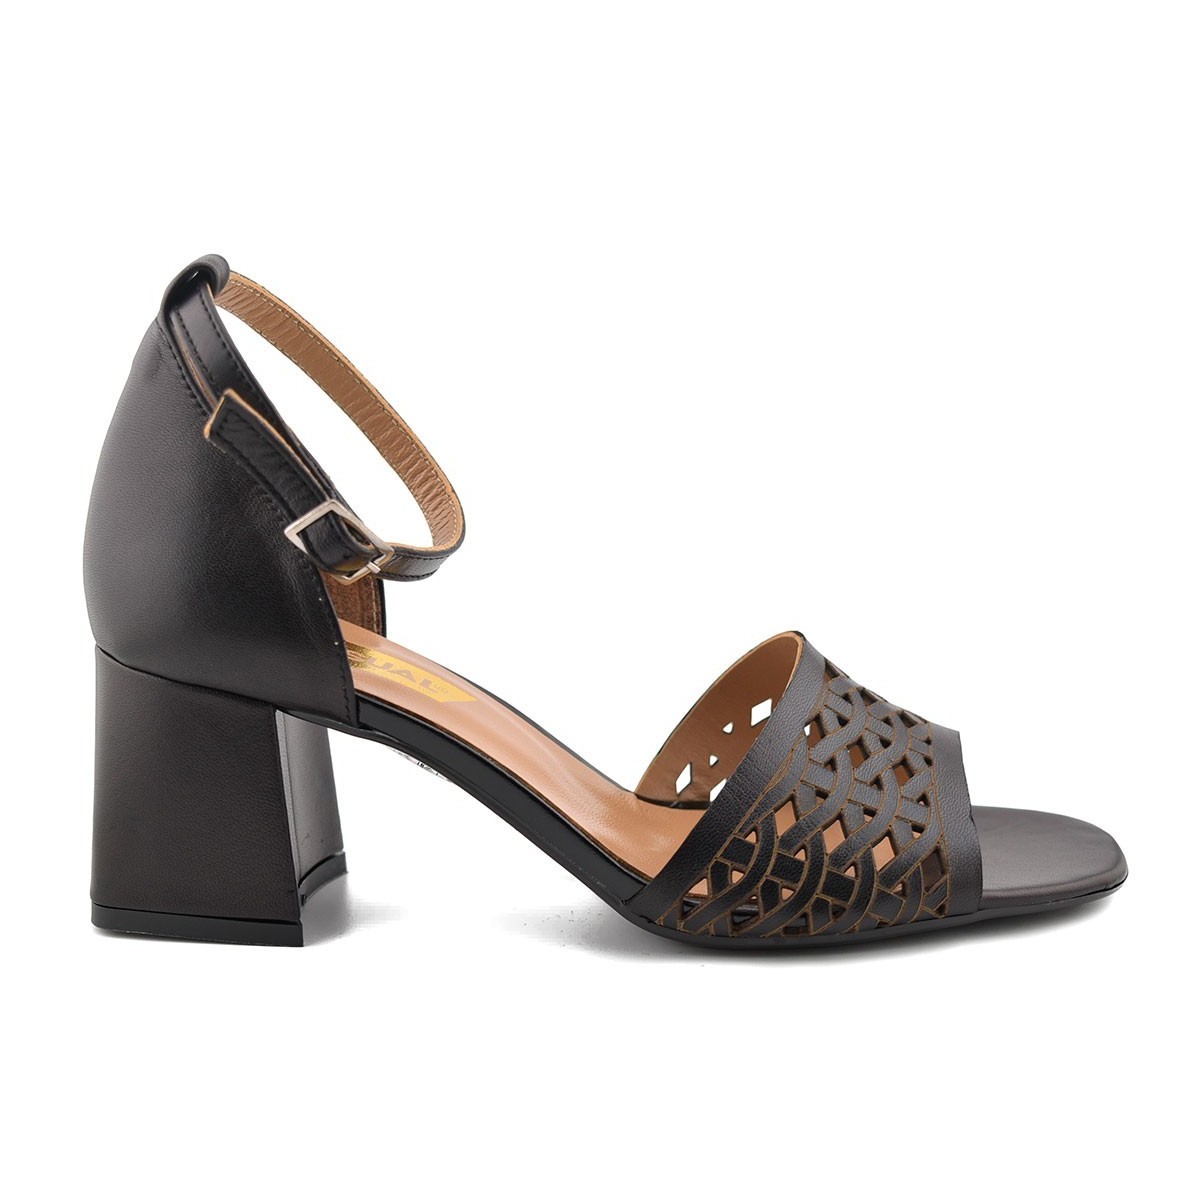 Black leather sandals with heel by Casual